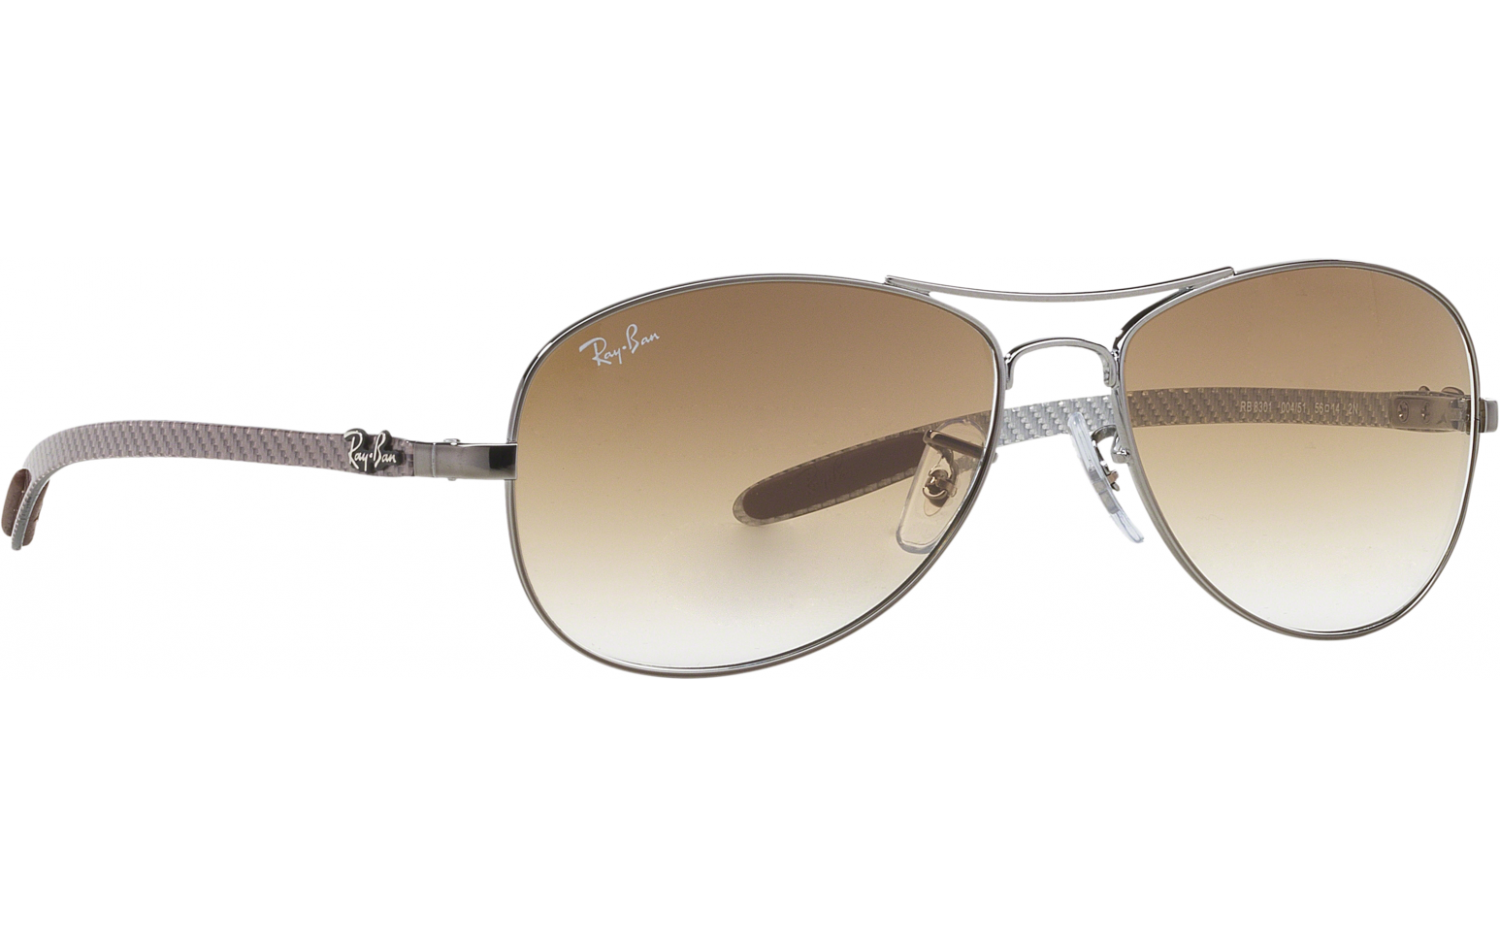 ray ban rb8301 review